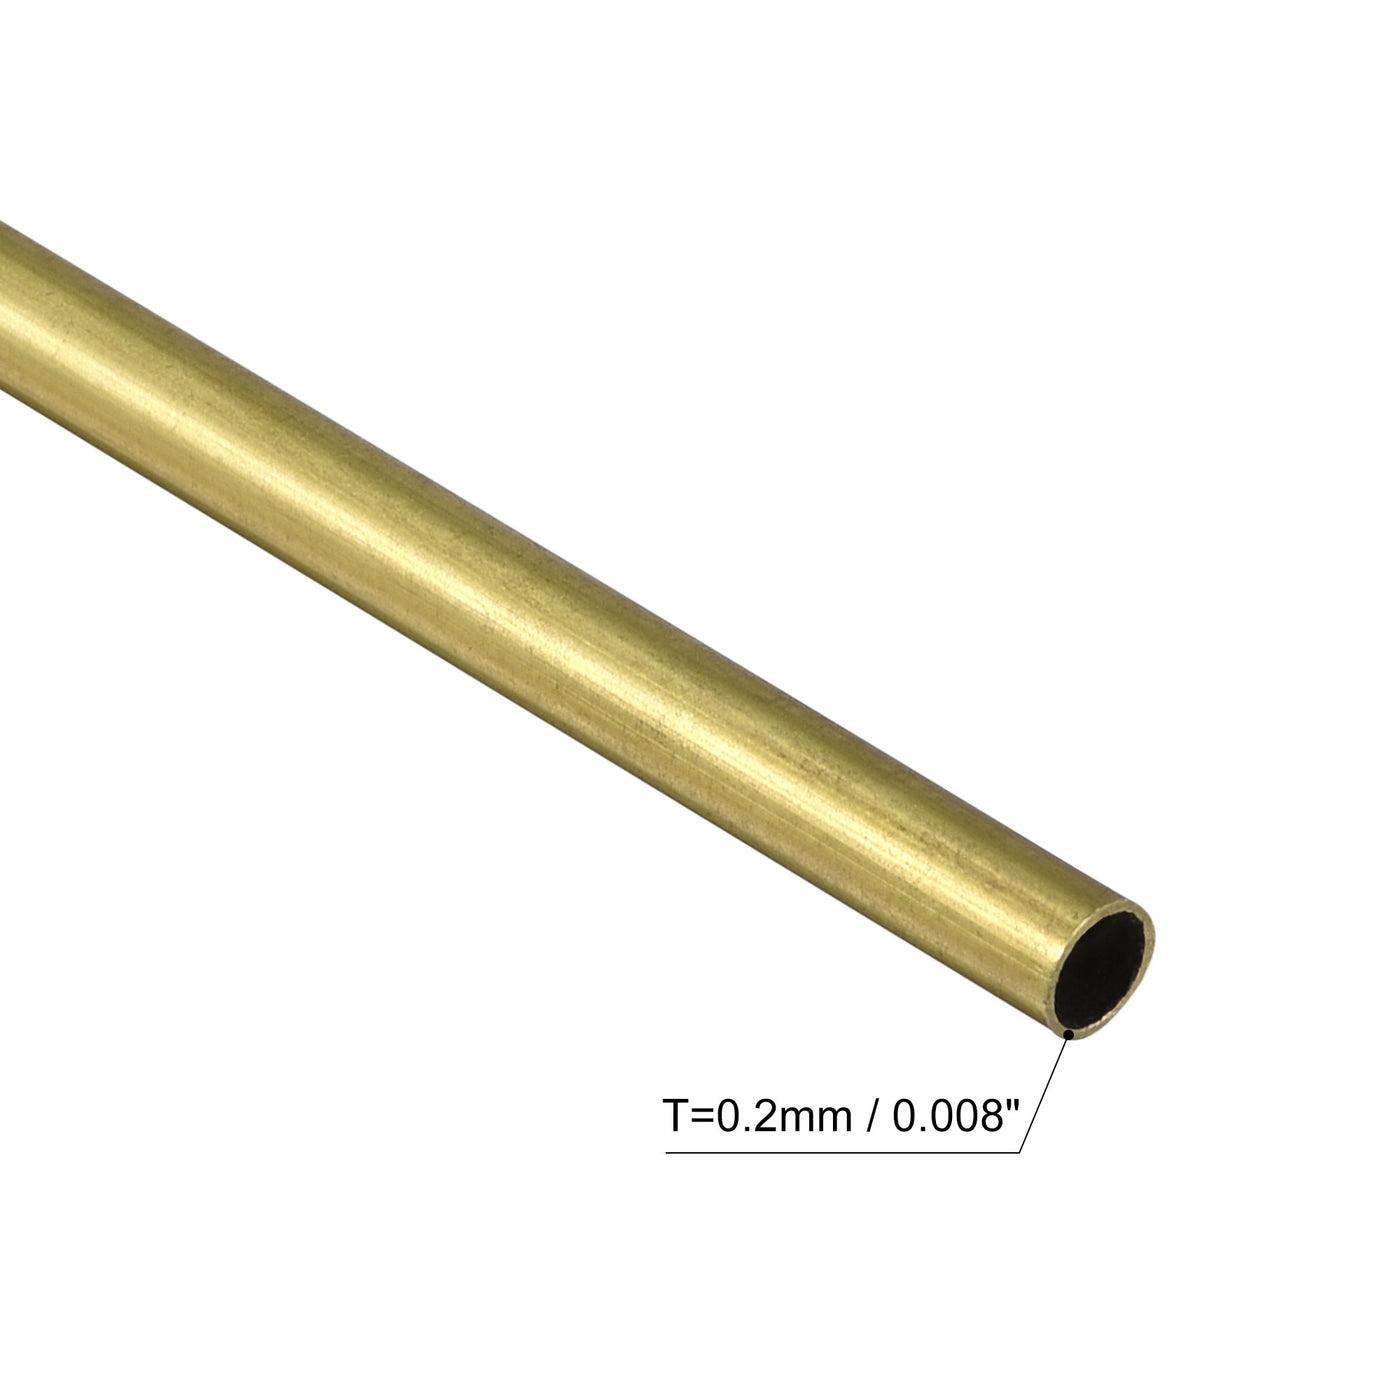 uxcell Uxcell 3Pcs 3mm x 0.2mm x 400mm Seamless Straight Brass Tube for Industry DIY Projects